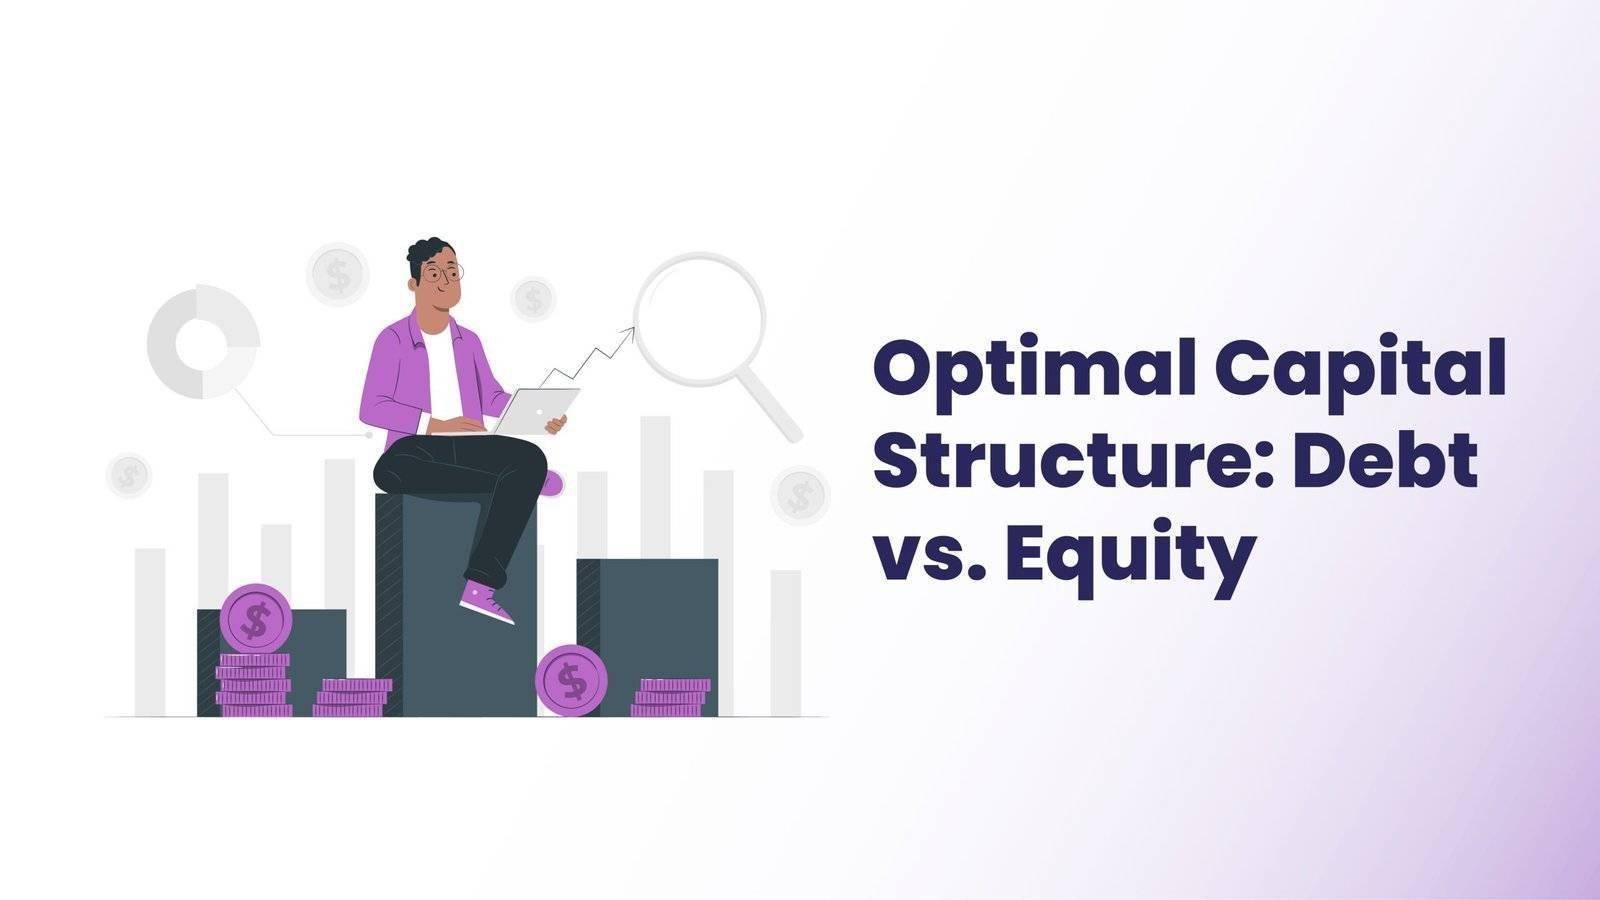 Optimal Capital Structure: Debt vs. Equity